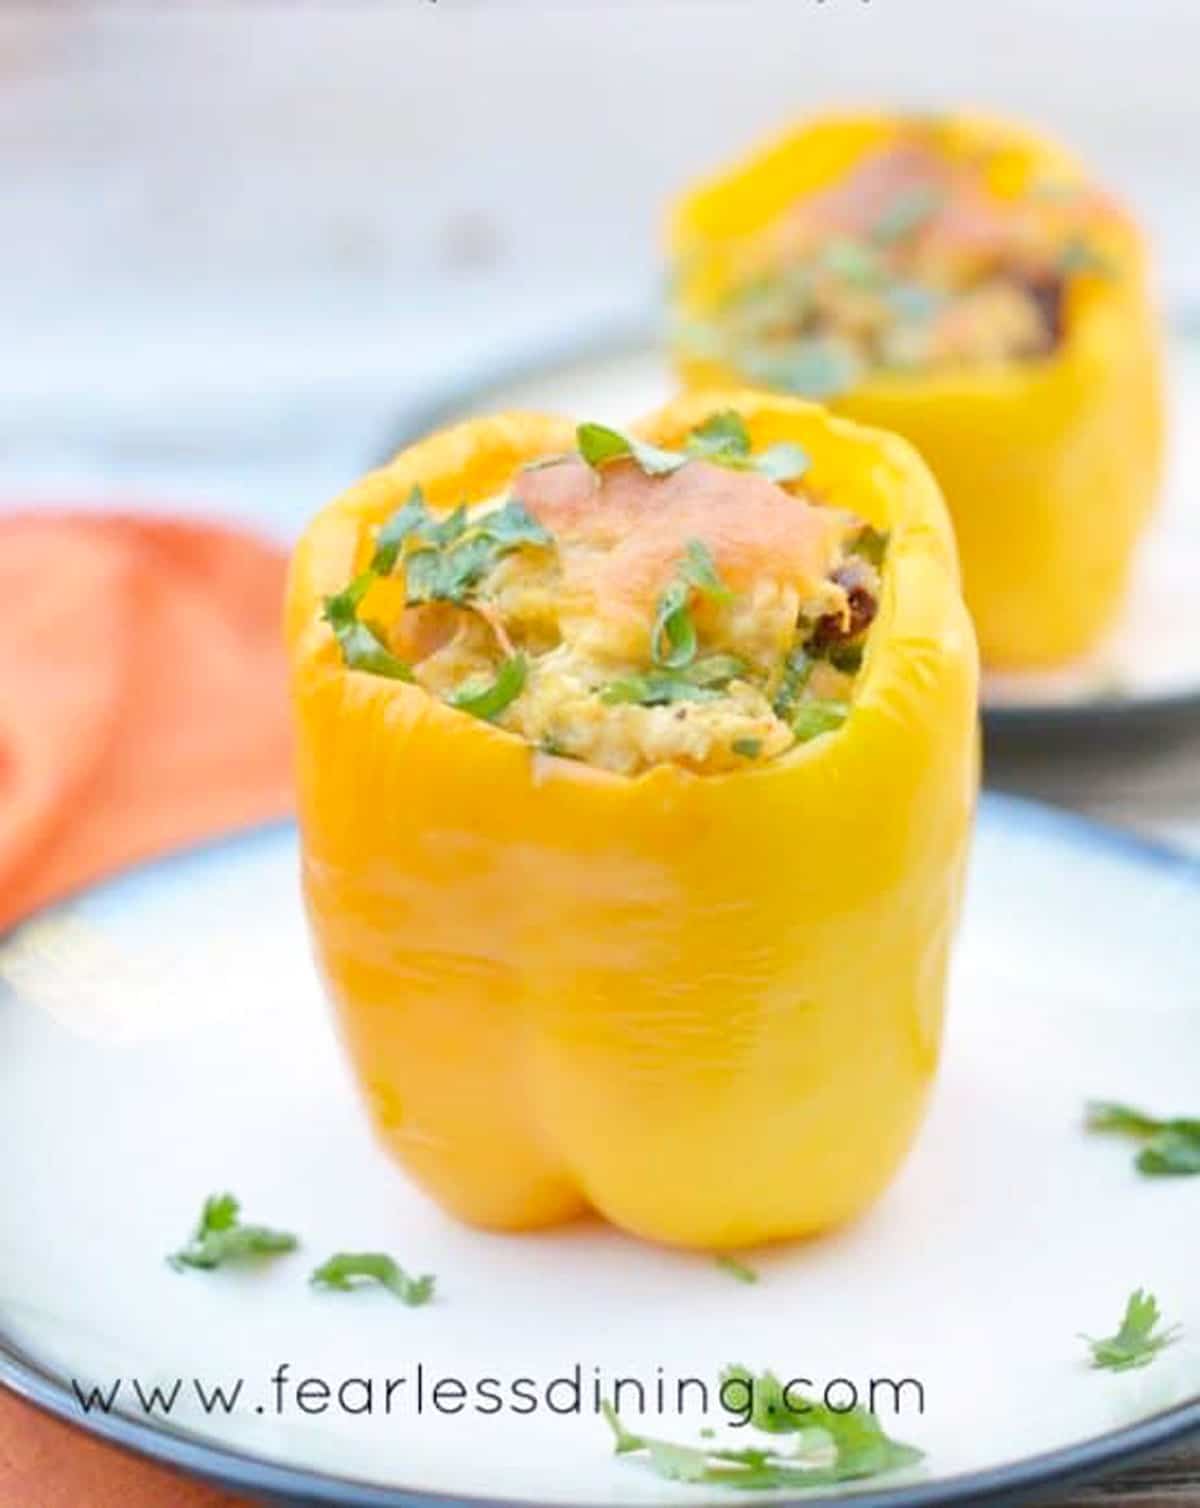 Big stuffed yellow peppers on two plates.